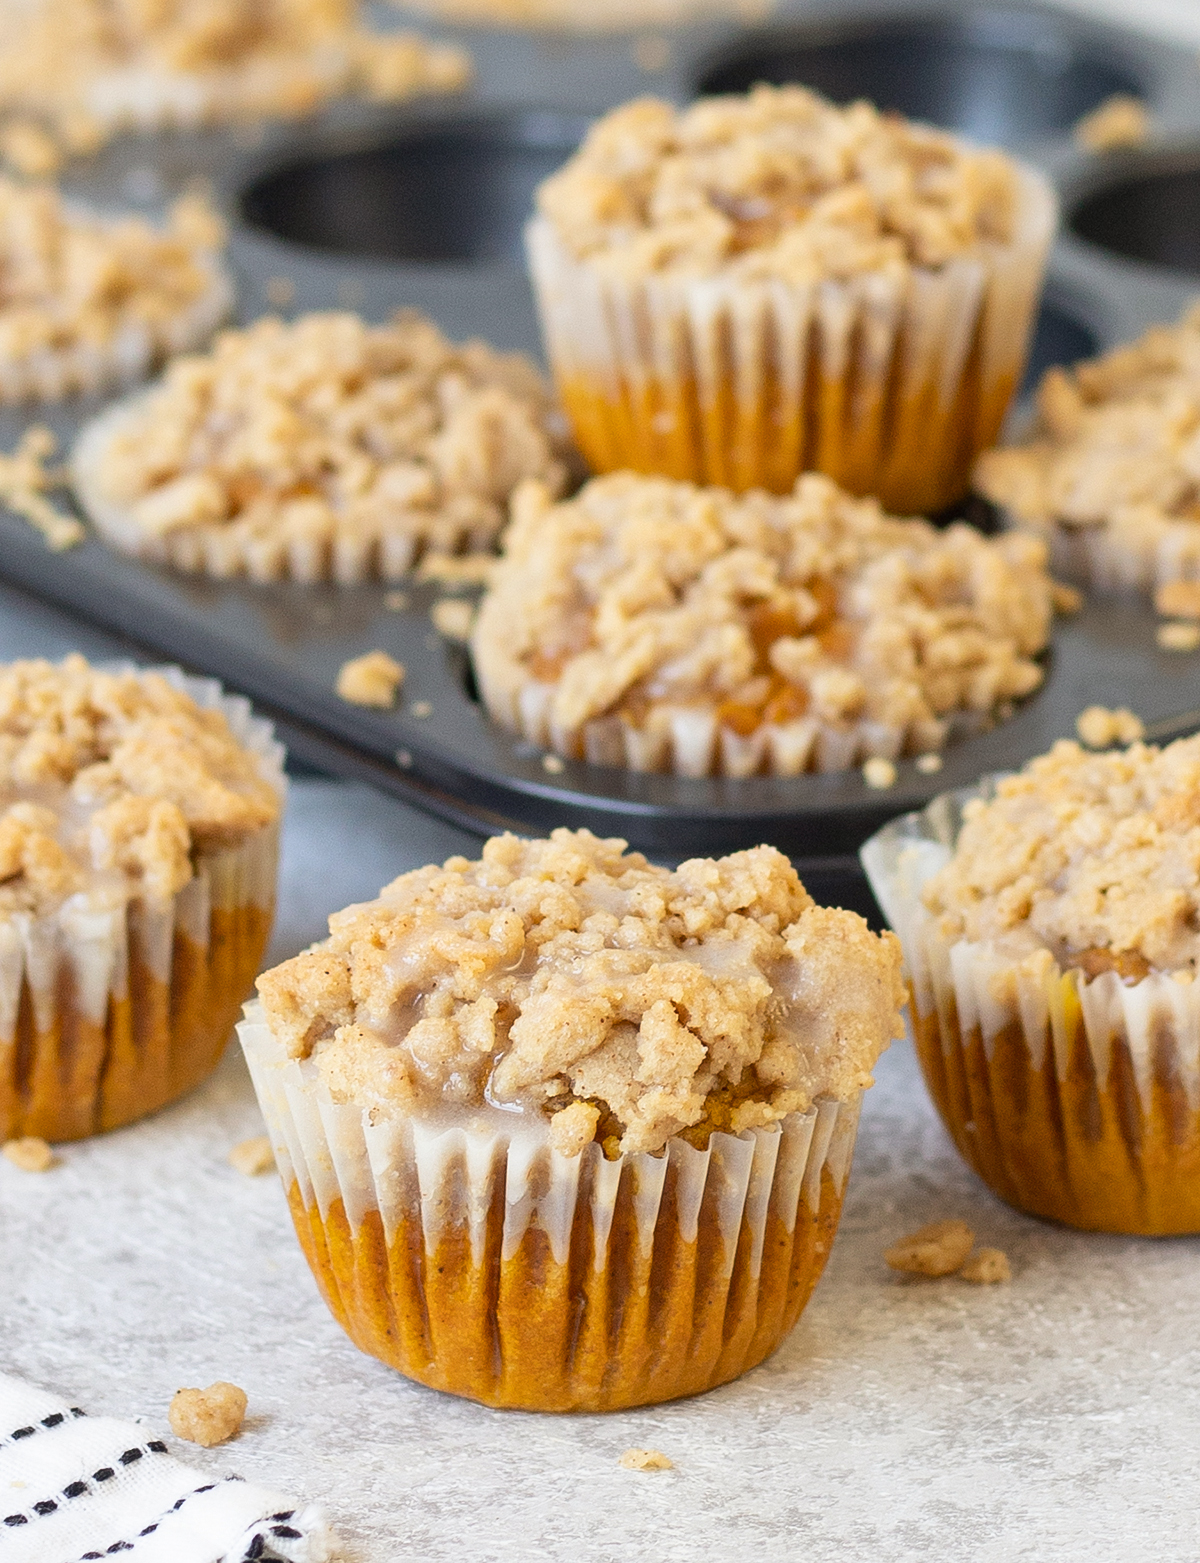 Pumpkin muffins with crumb topping